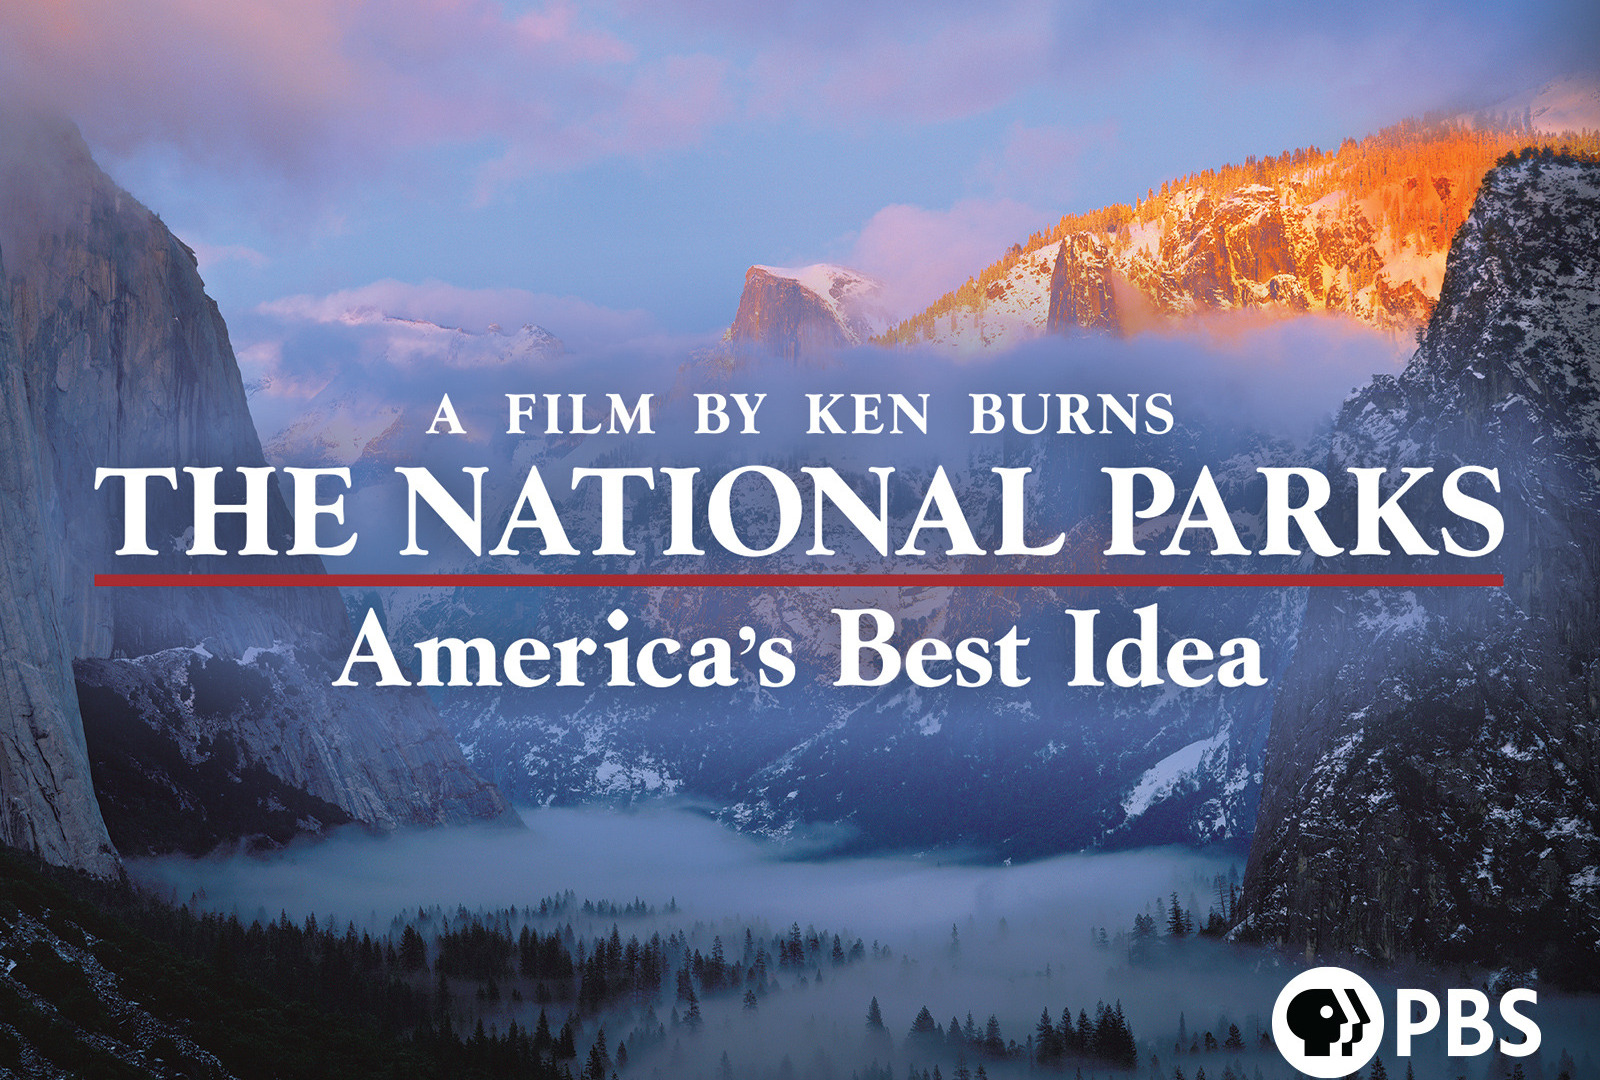 Show The National Parks: America's Best Idea